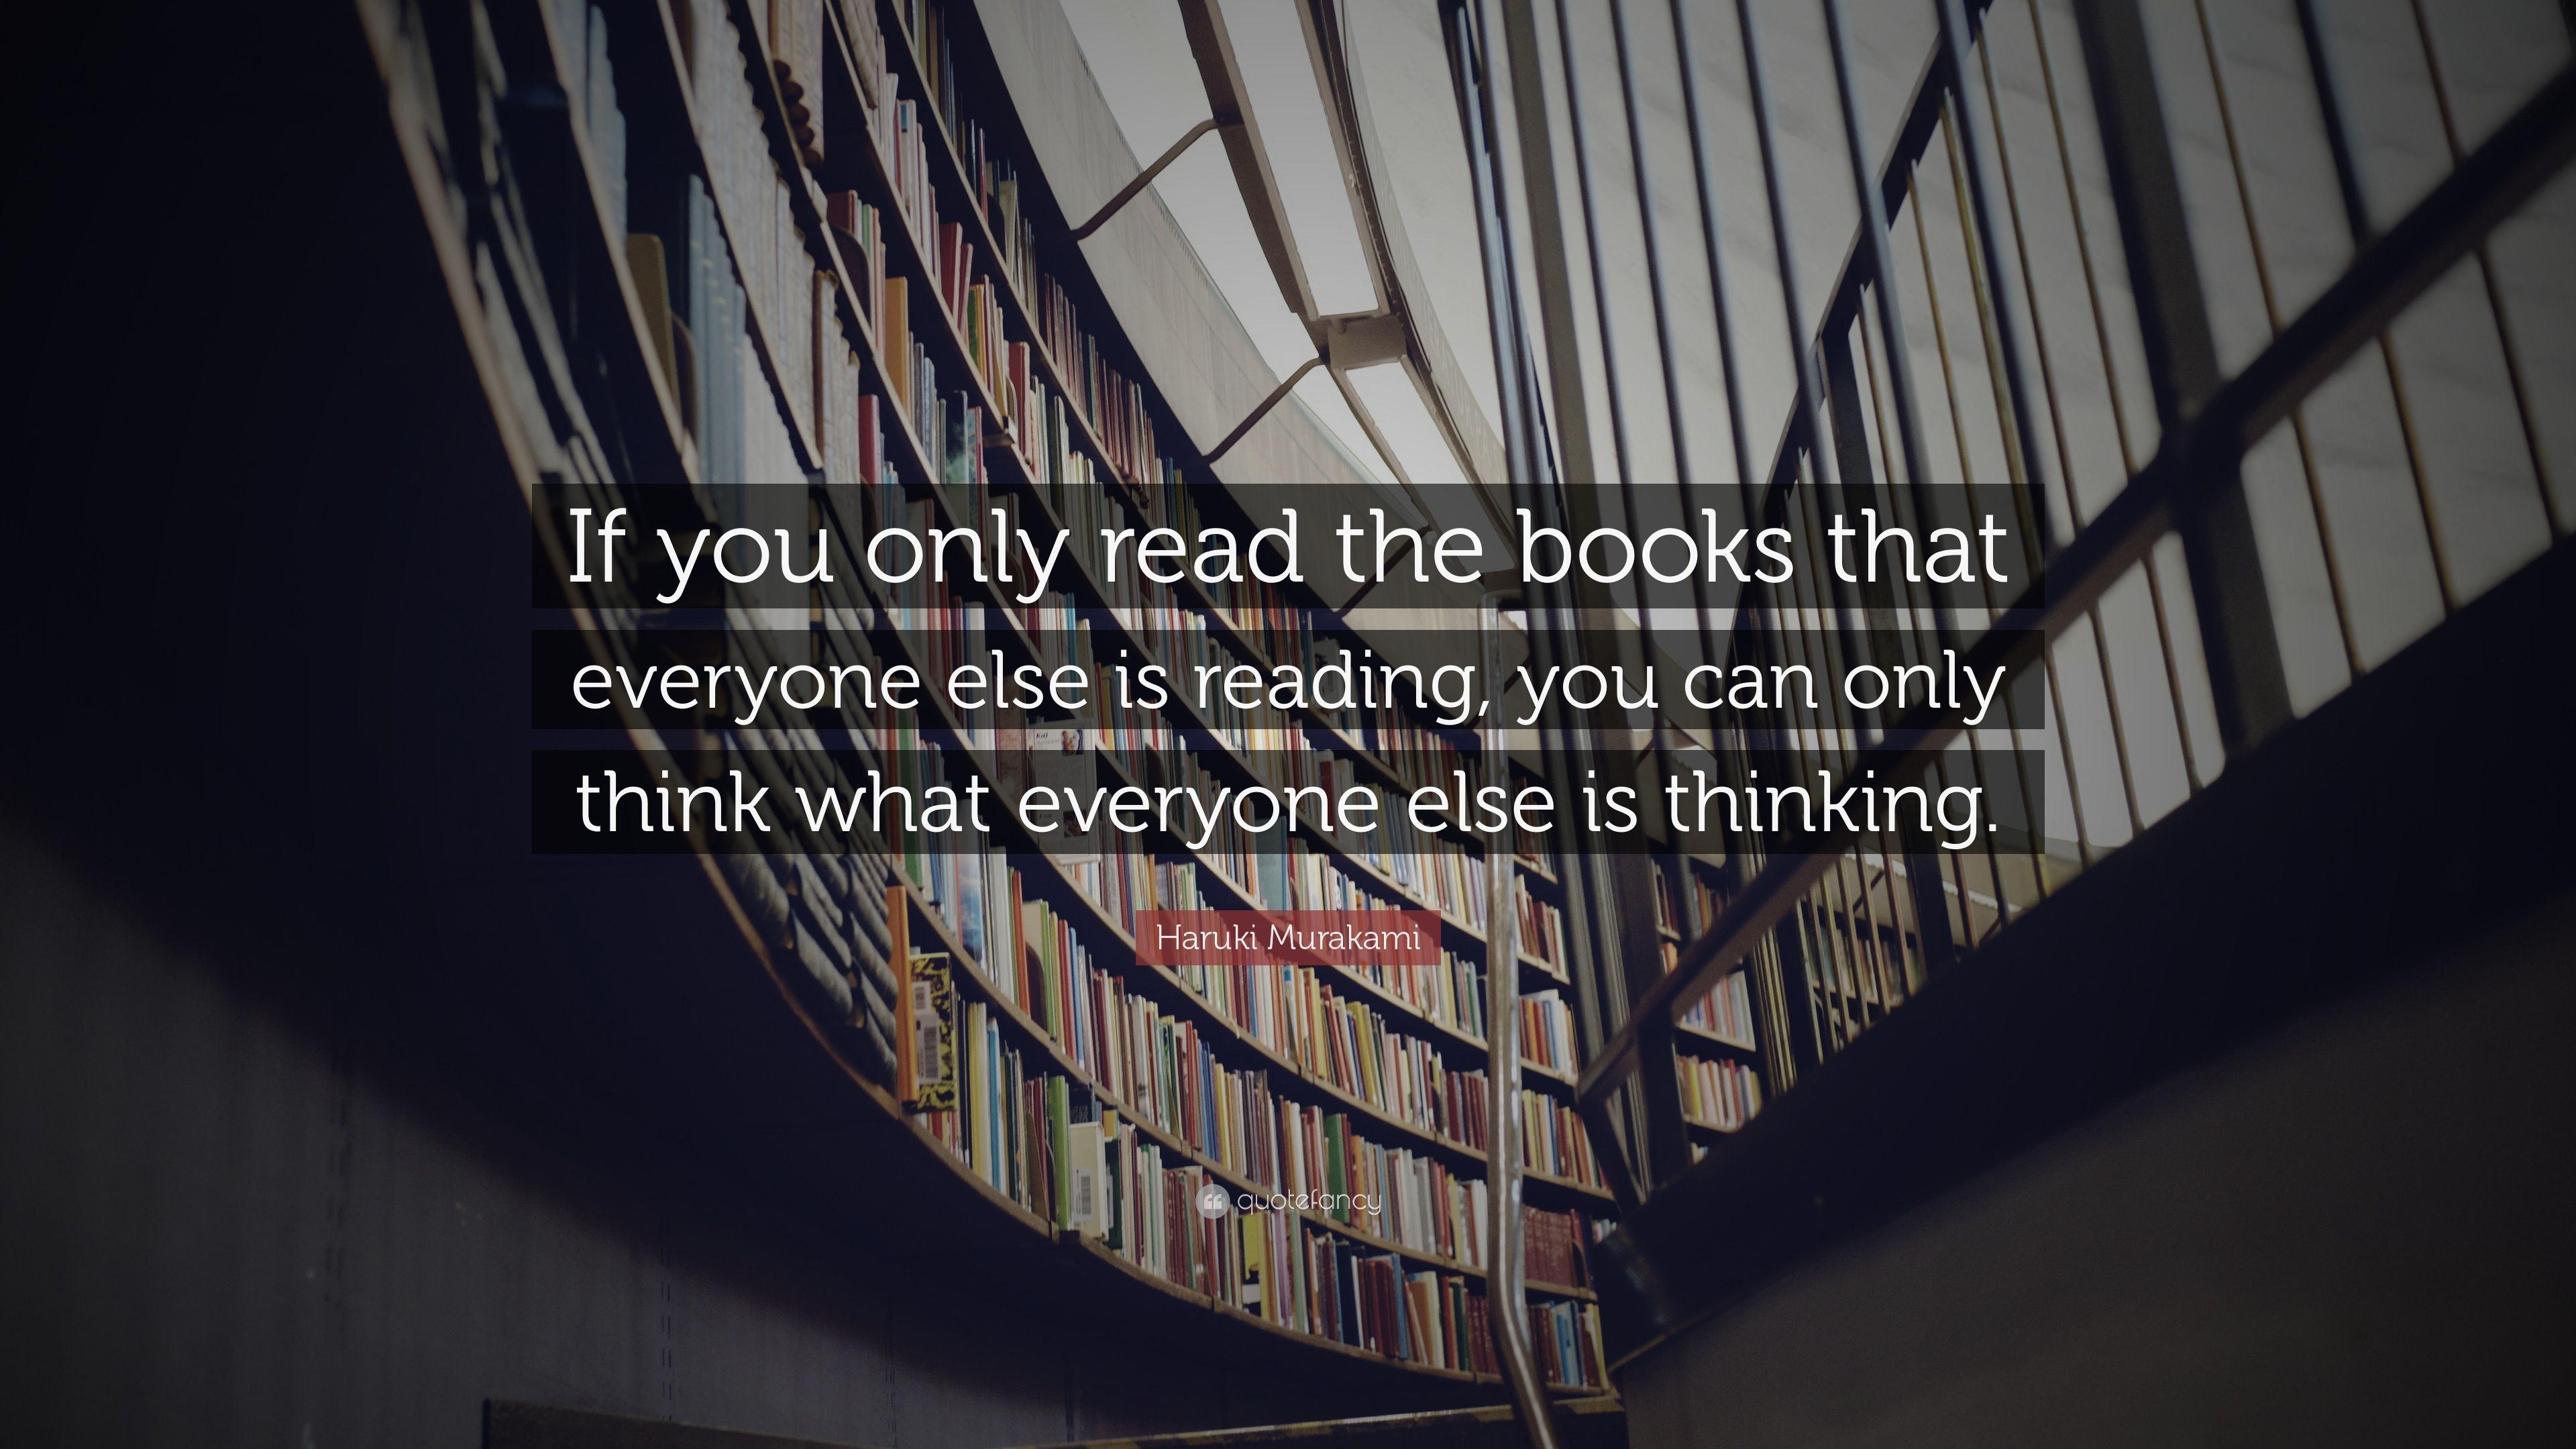 Quotes About Books And Reading (2023 Update)